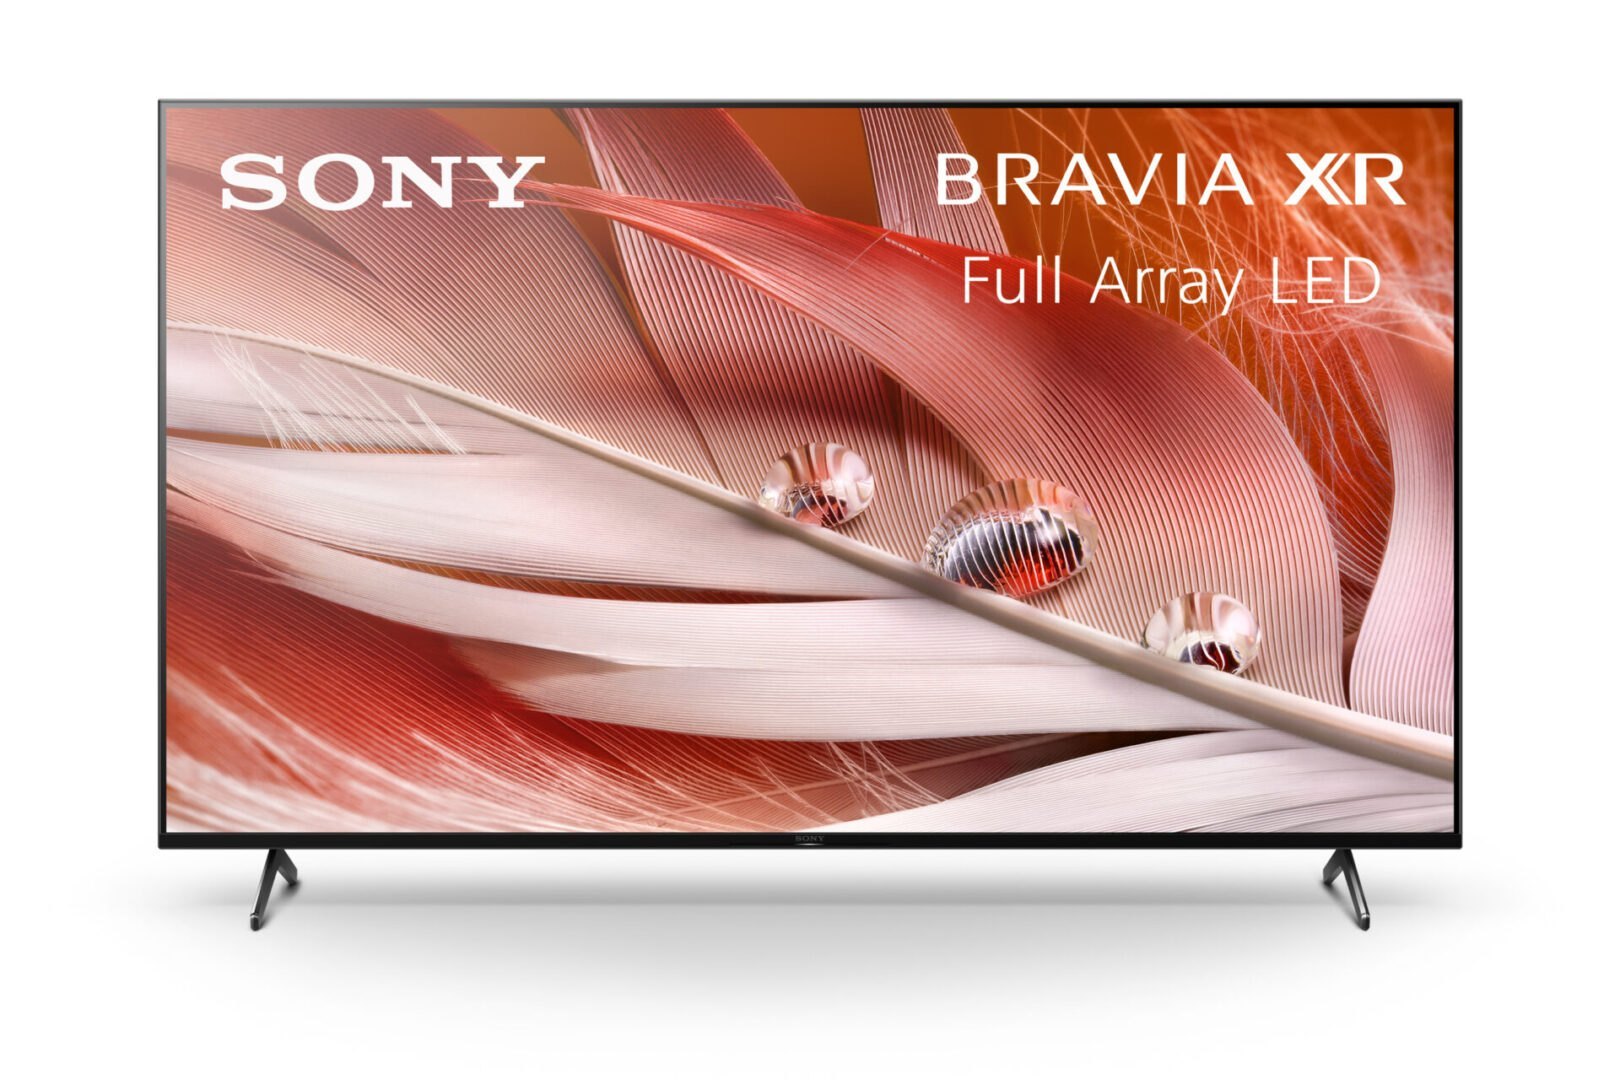 Sony Bravia X75L Series 4K HDR LED TVs Launched in India